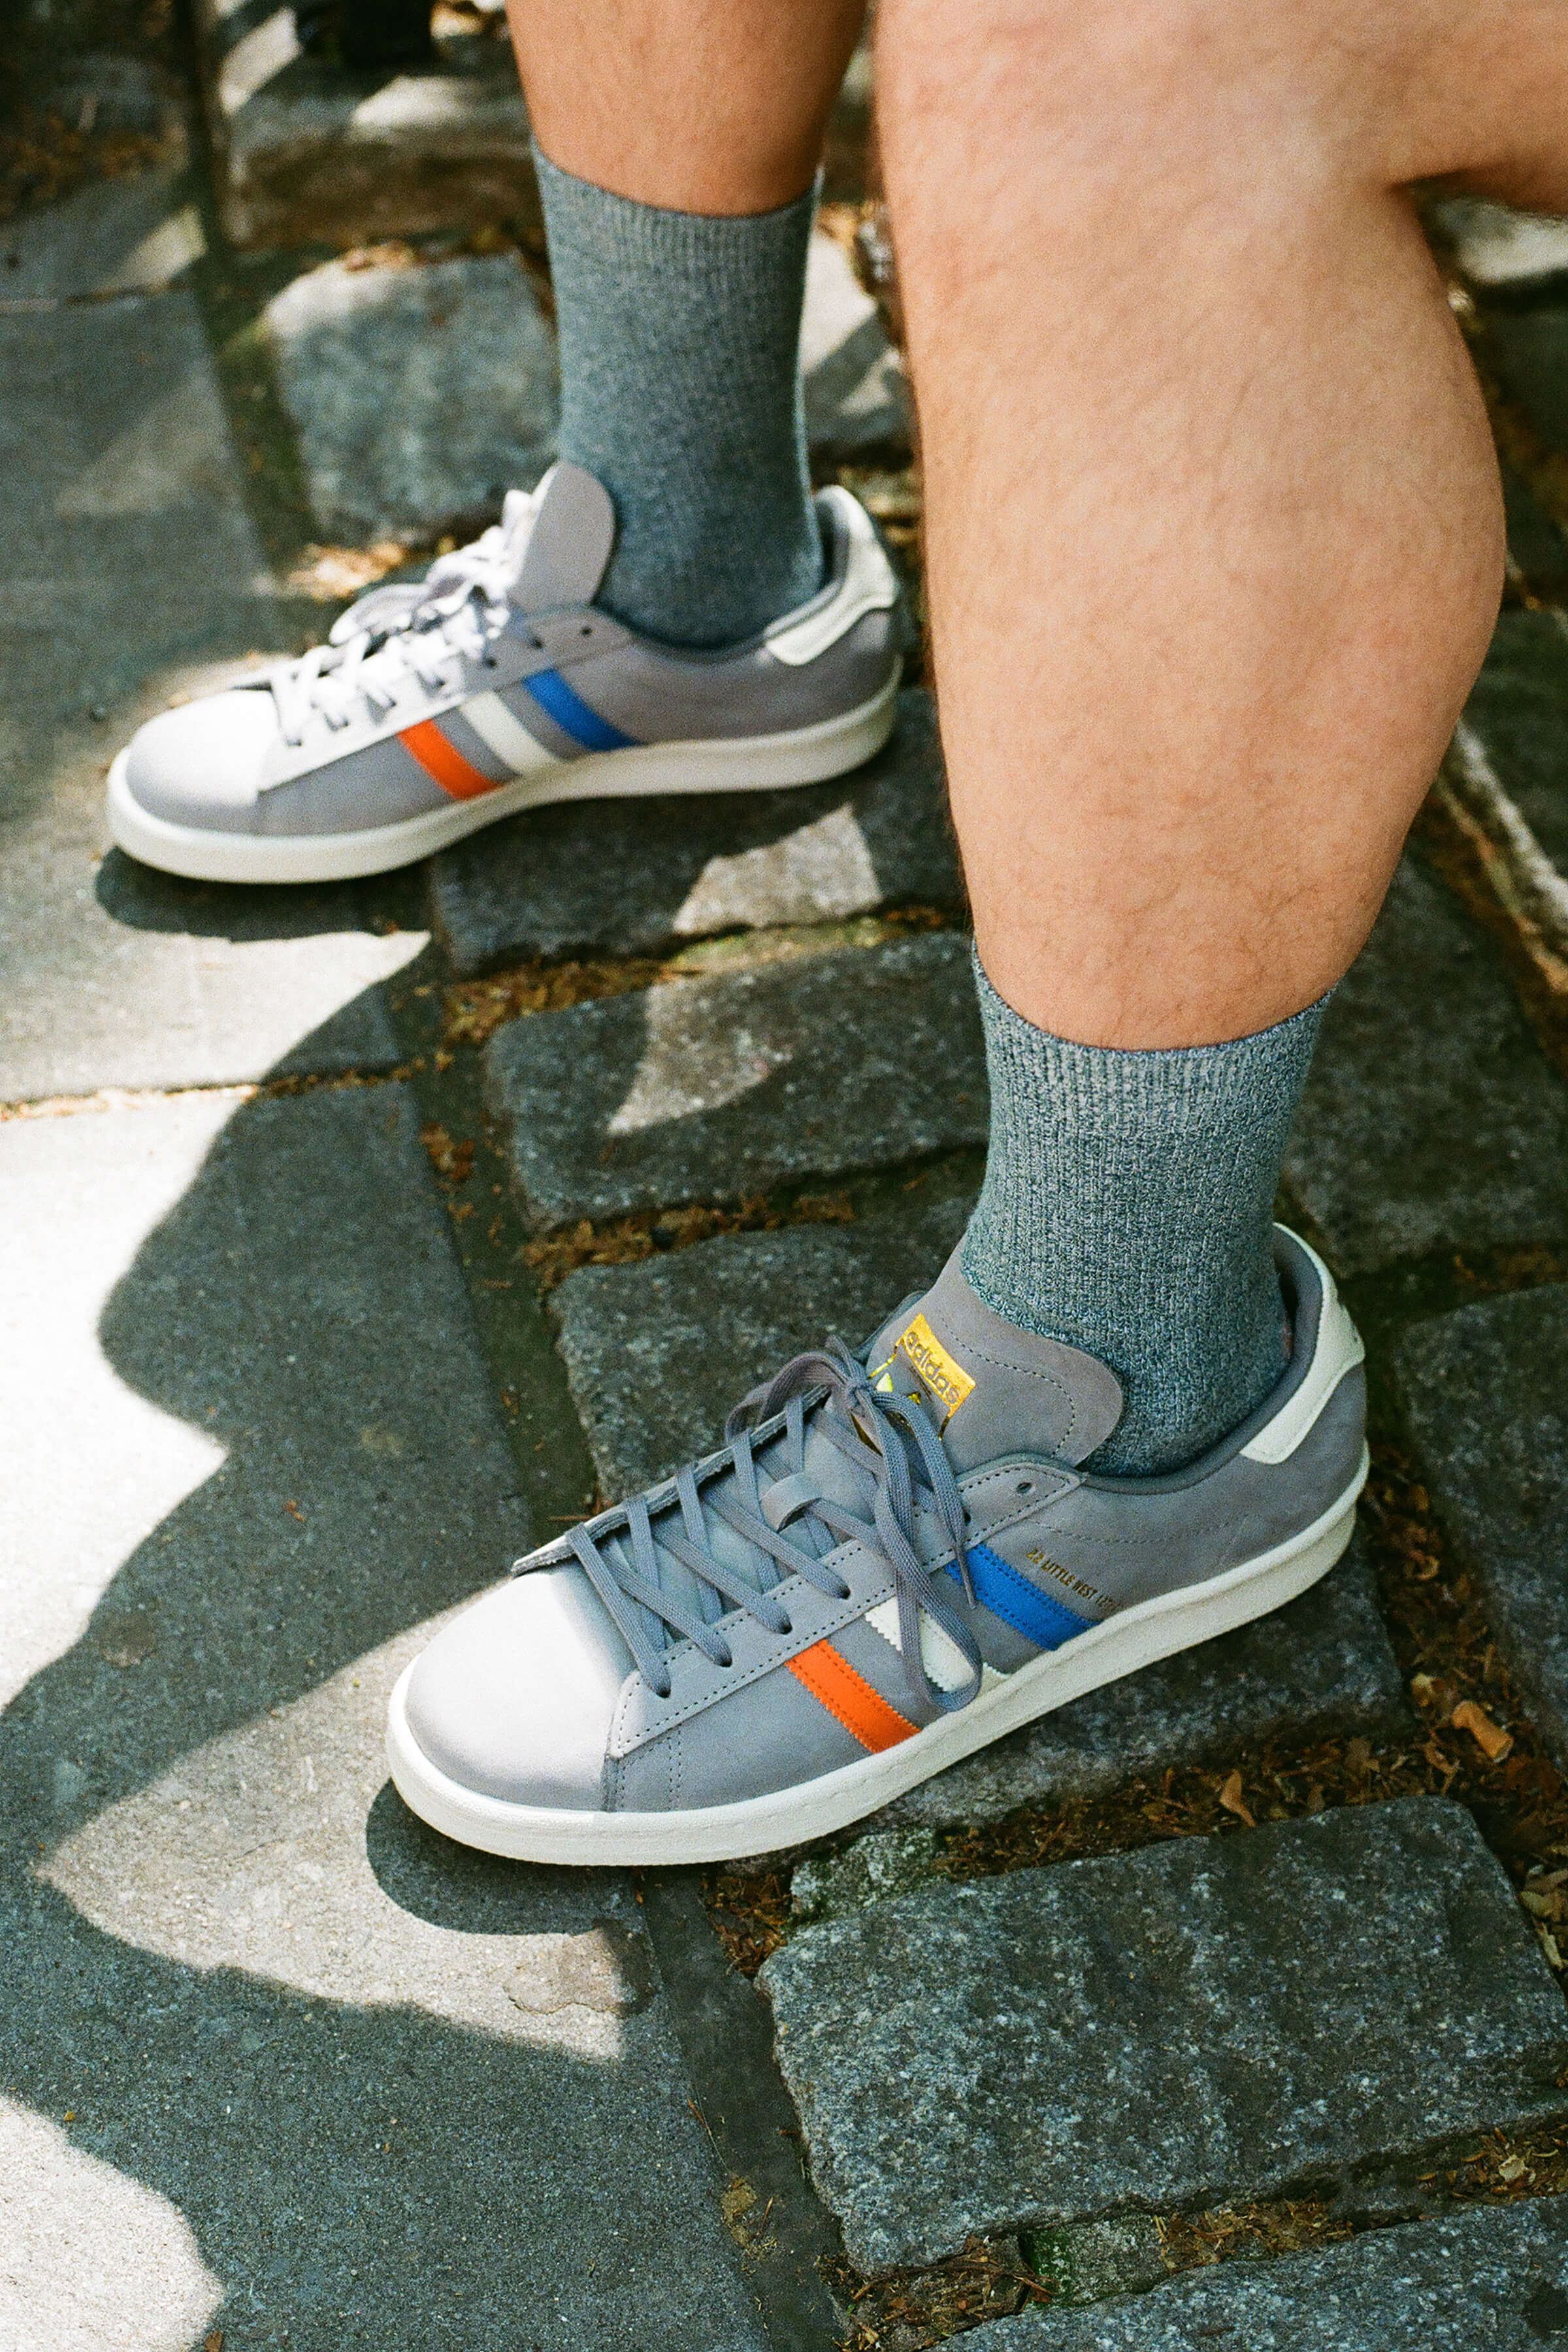 Find the Campus 80s by Sneakersnstuff and adidas Originals here. - SNS